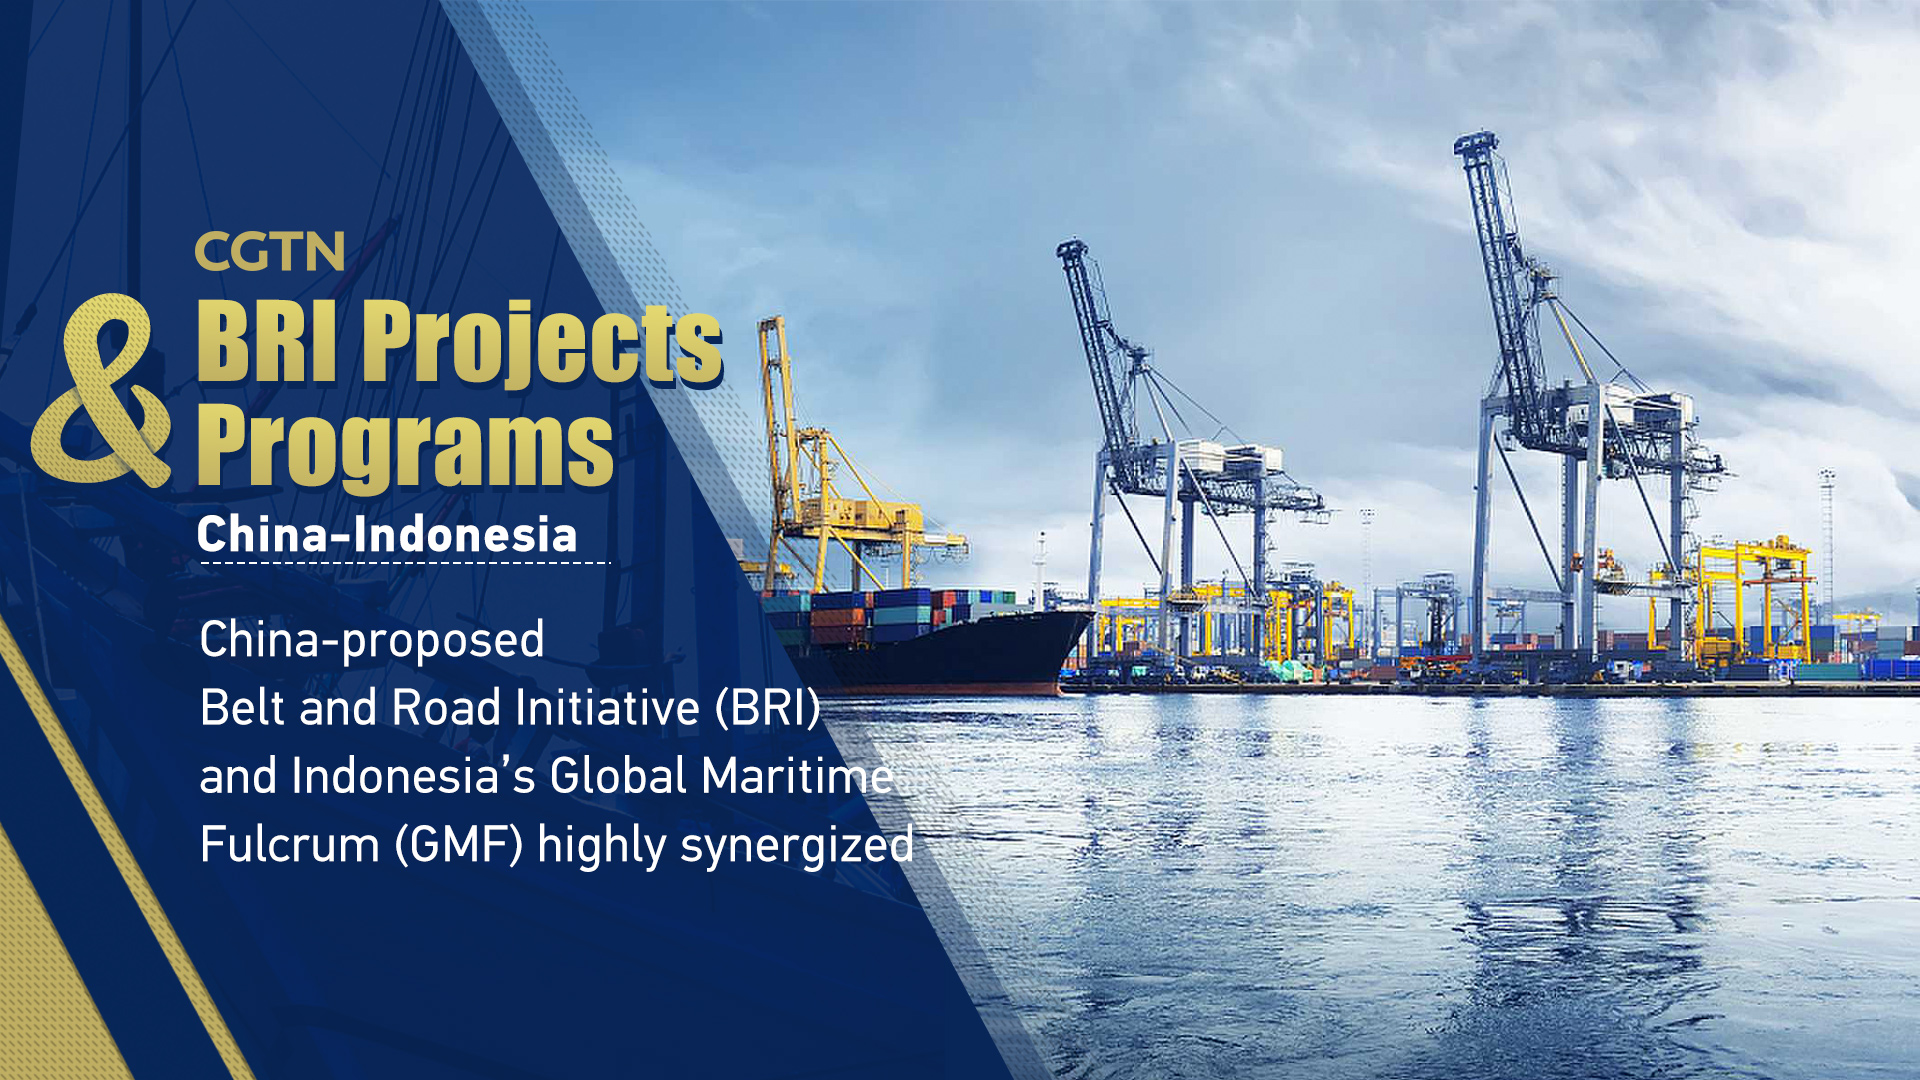 BRI Projects & Programs: China-proposed BRI and Indonesia's GMF highly synergized